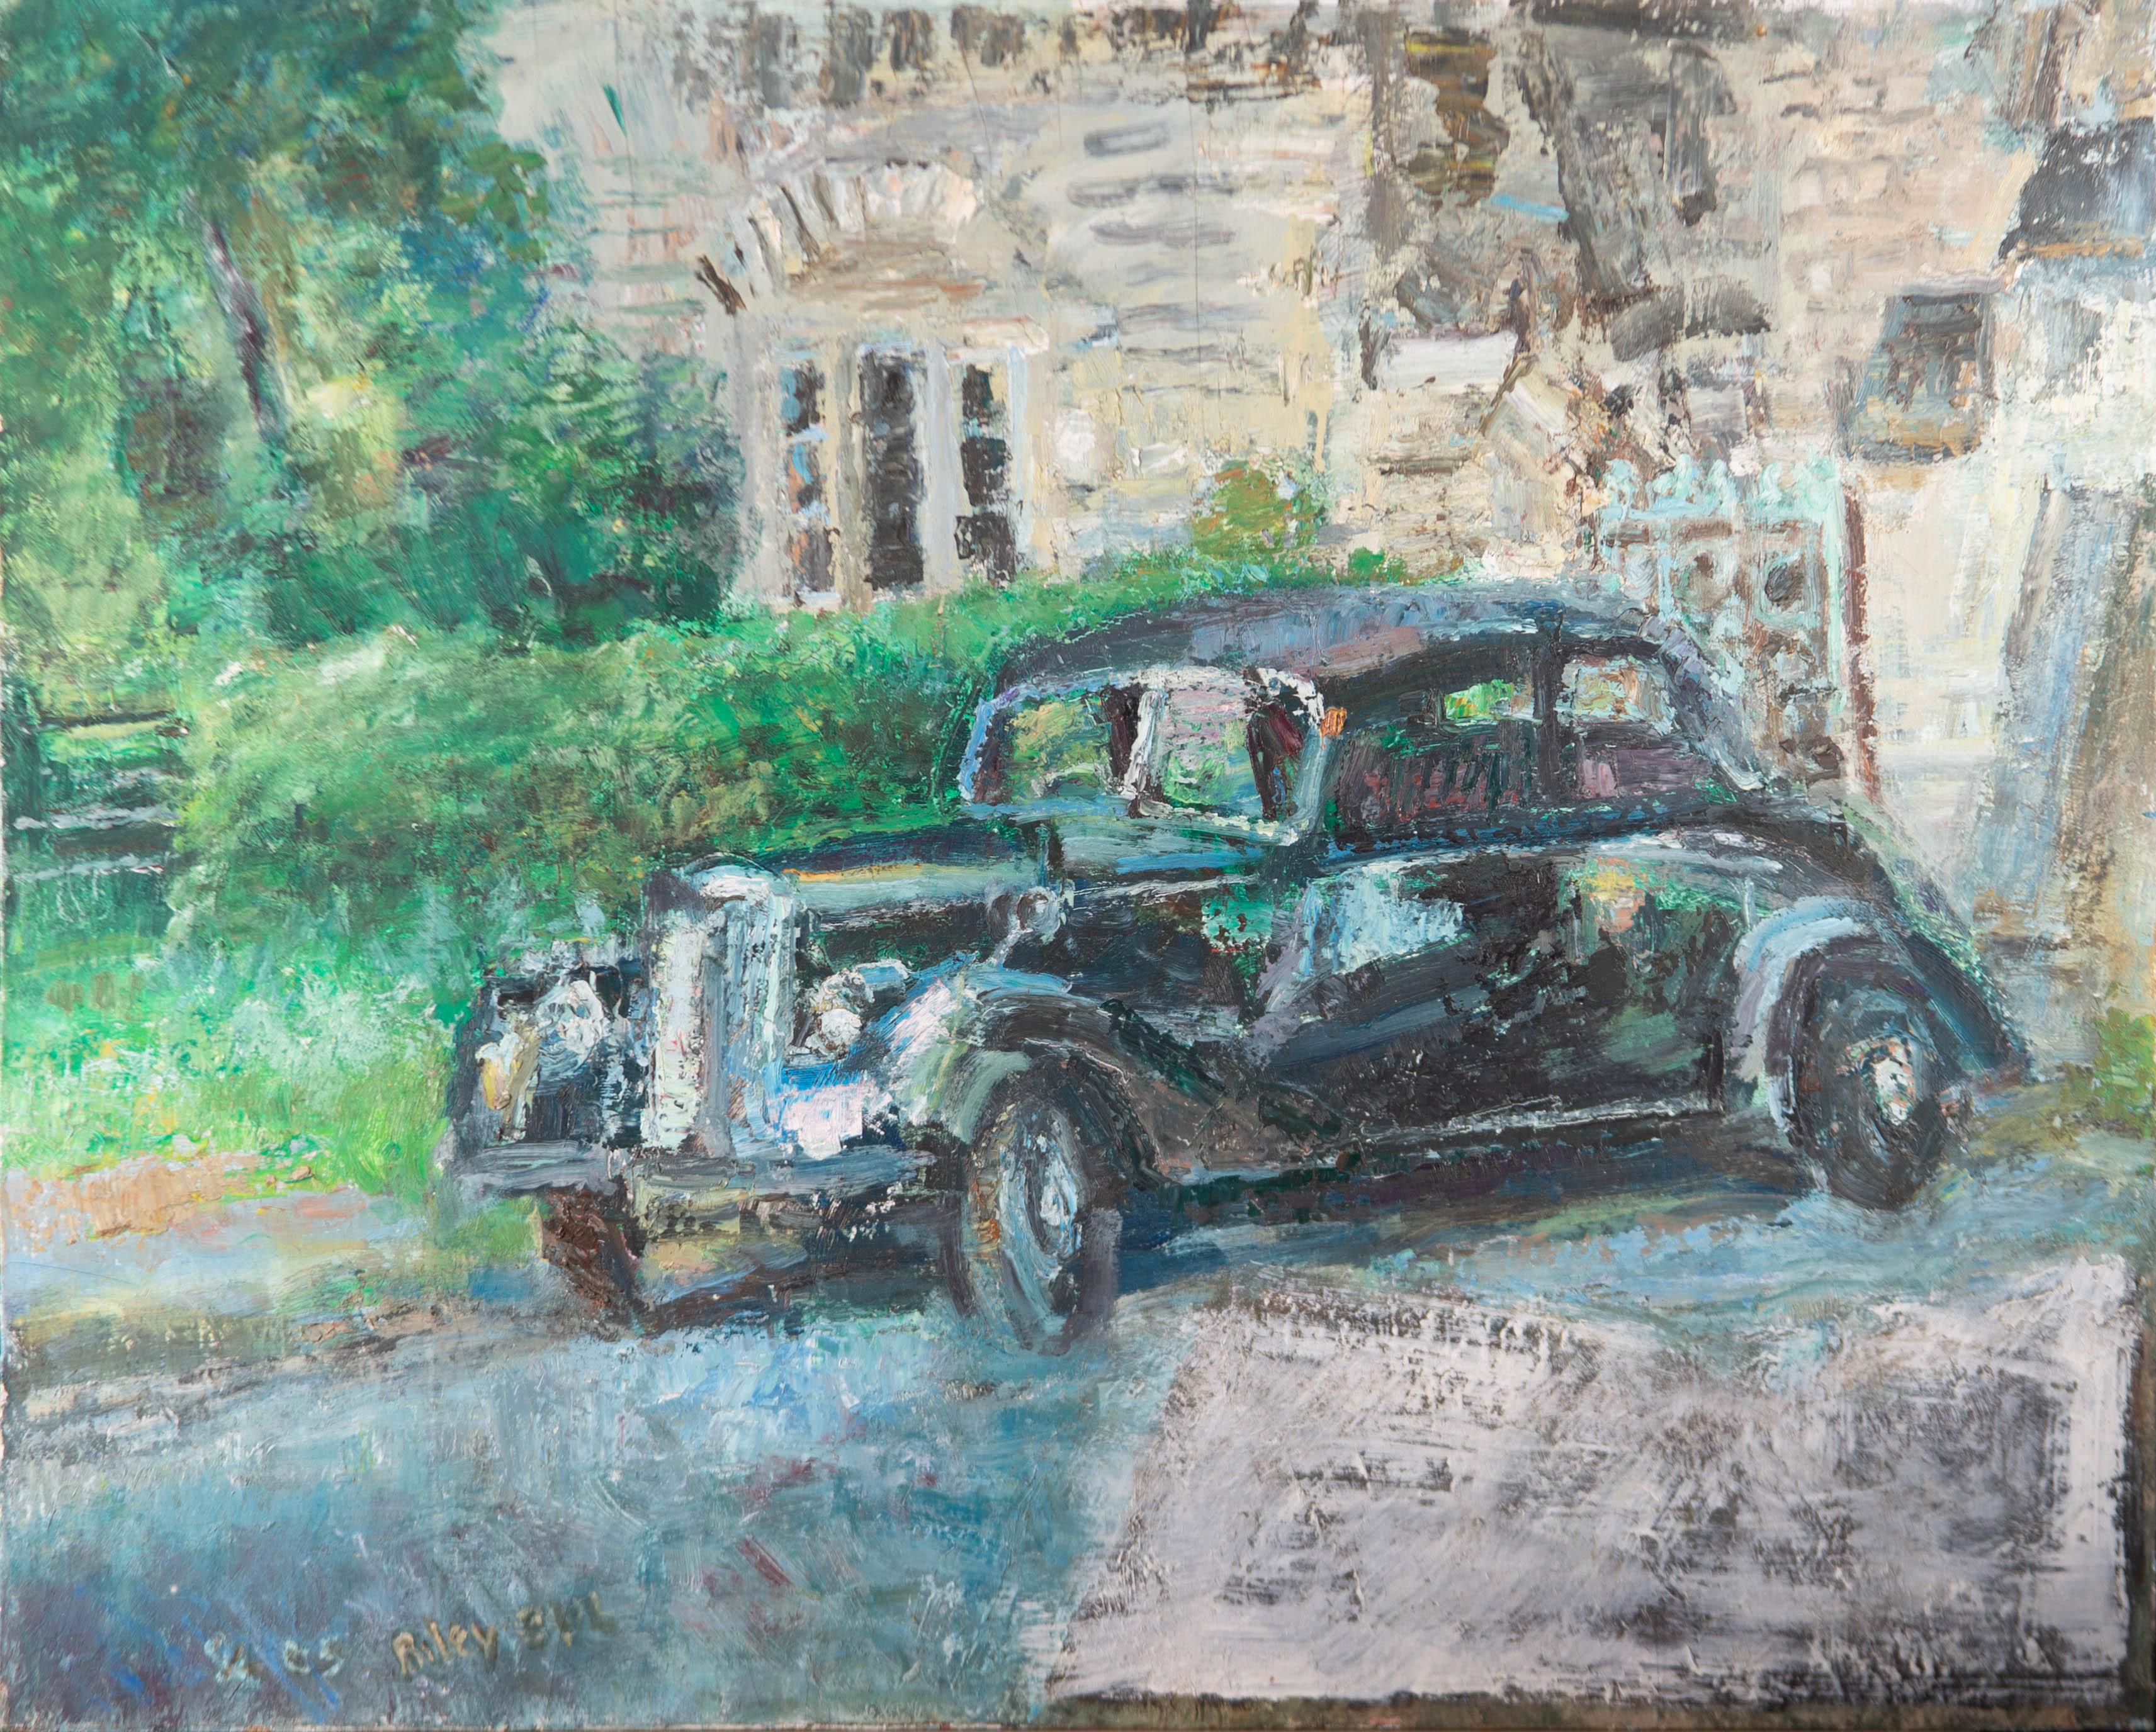 Impastoed oils are used in an impressionistic manner to render a fine study of a vintage car. The artwork is dated and indistinctly inscribed in the lower left. Unsigned. On canvas laid to board.
